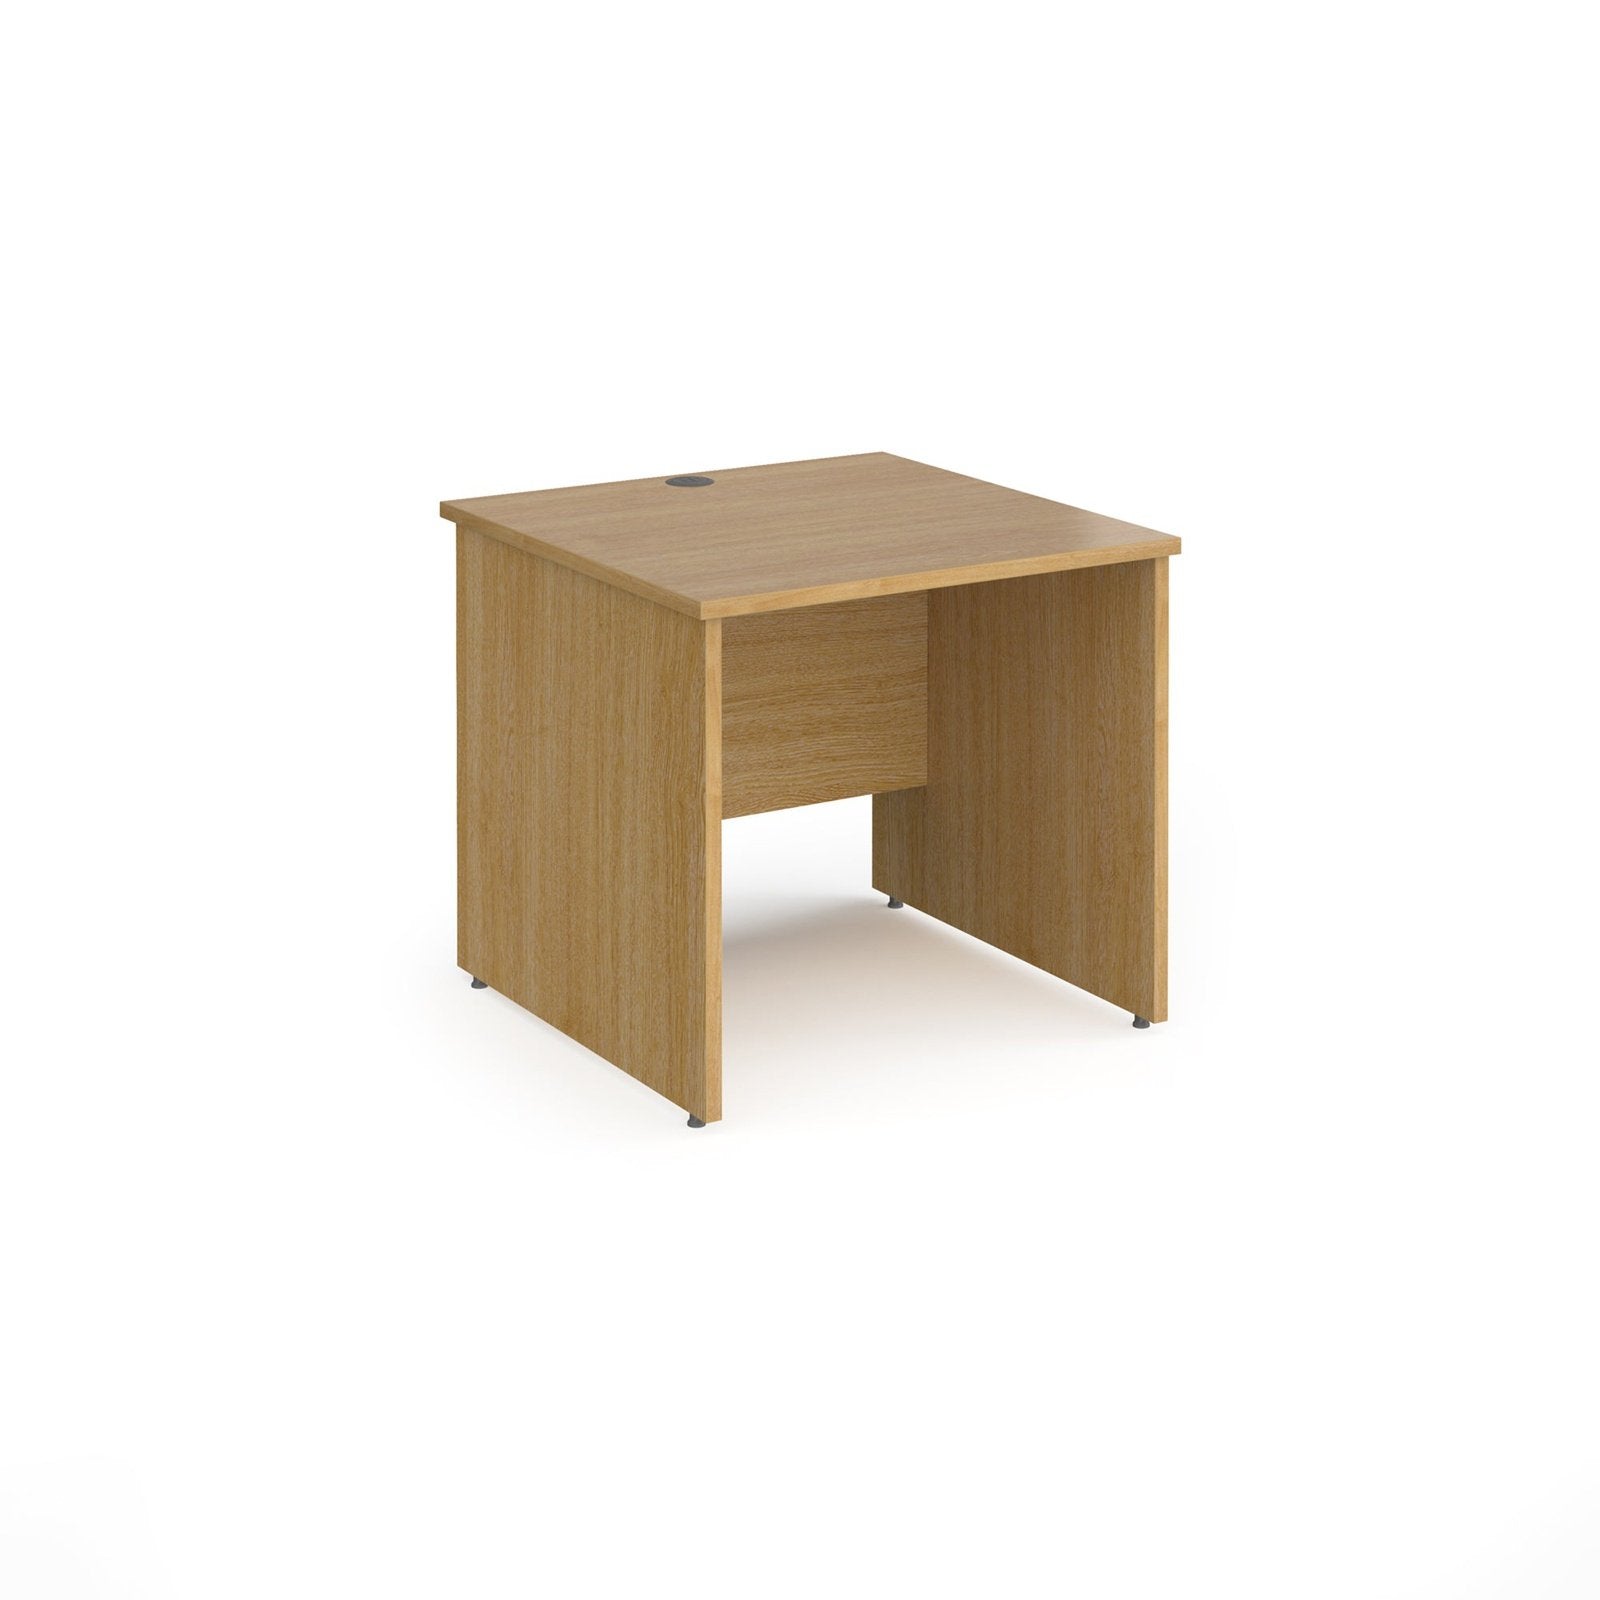 Contract 25 straight desk with panel leg - Office Products Online